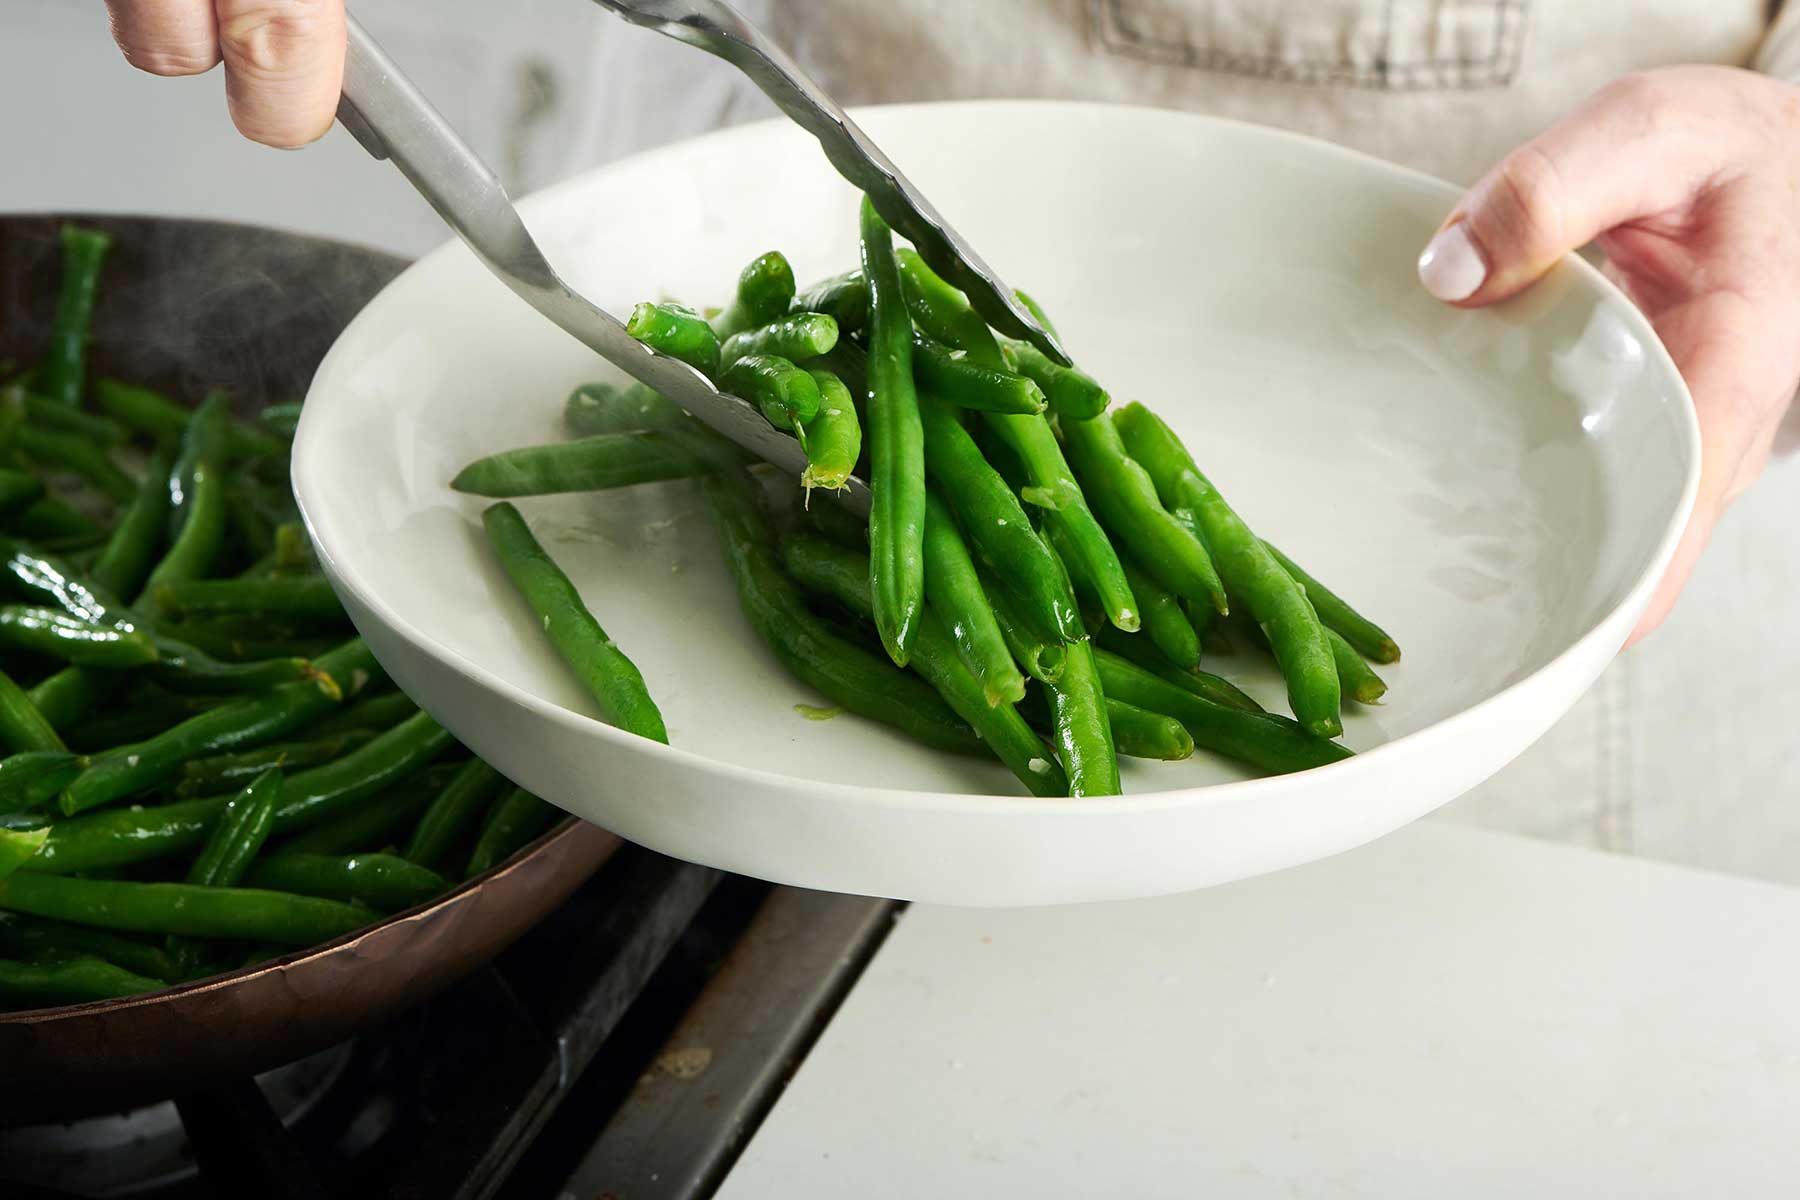 Using tongs to place Cook Fresh Green Beans on plate.